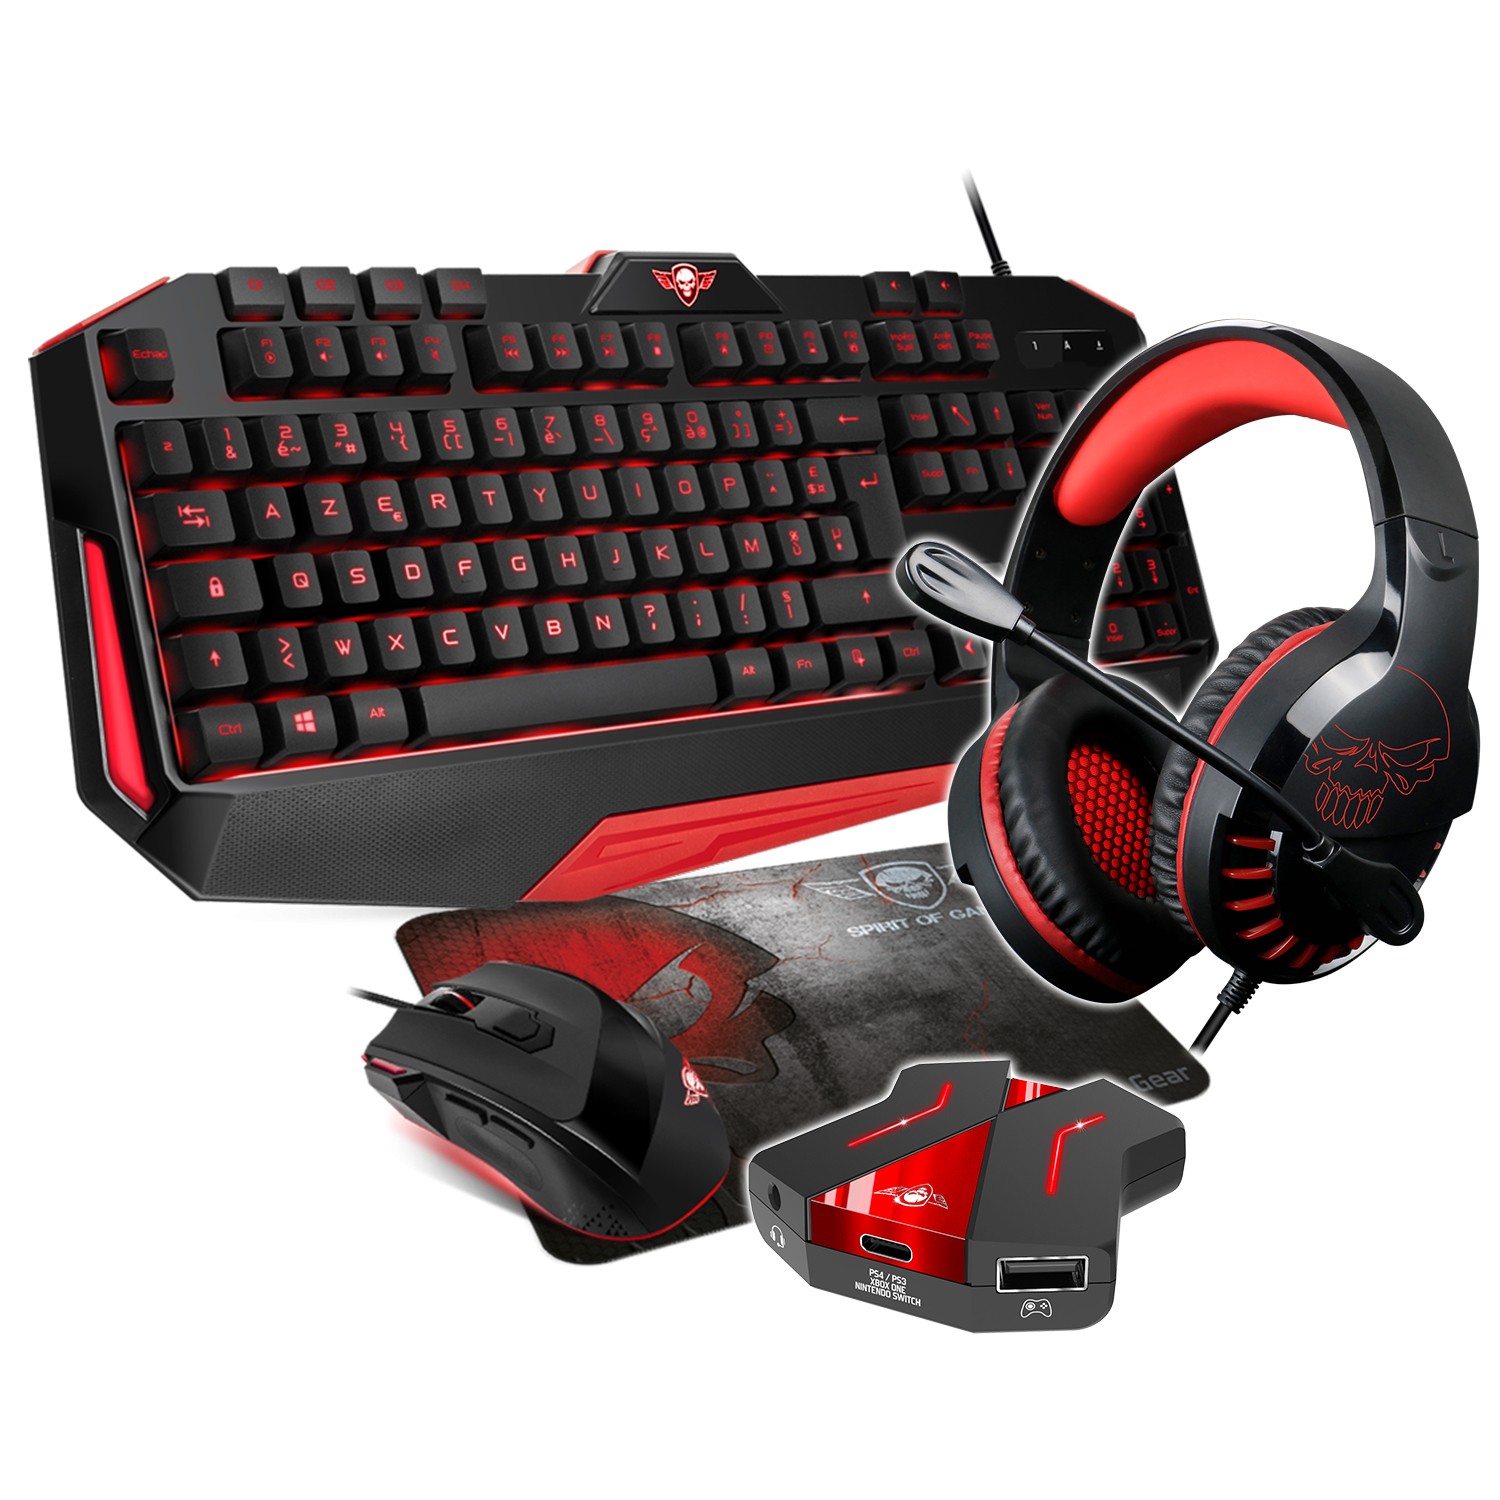 Pack Cross Gamer Pro Clavier souris Tapis Casque Convertisseur pour Xbox One PS4 PS3 Switch